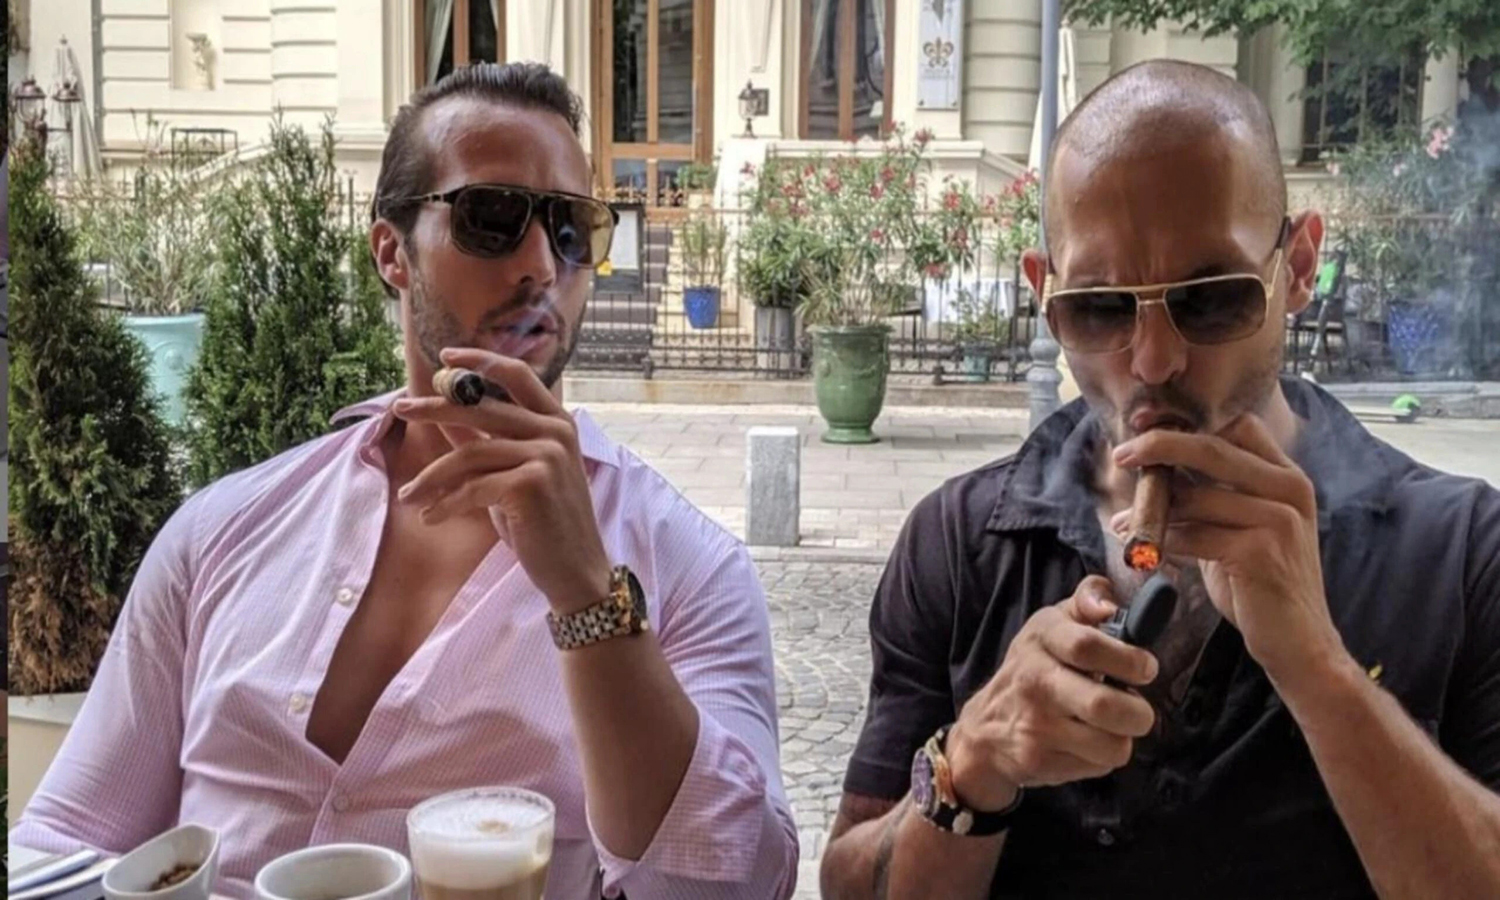 Andrew and Tristan Tate smoking cigars together